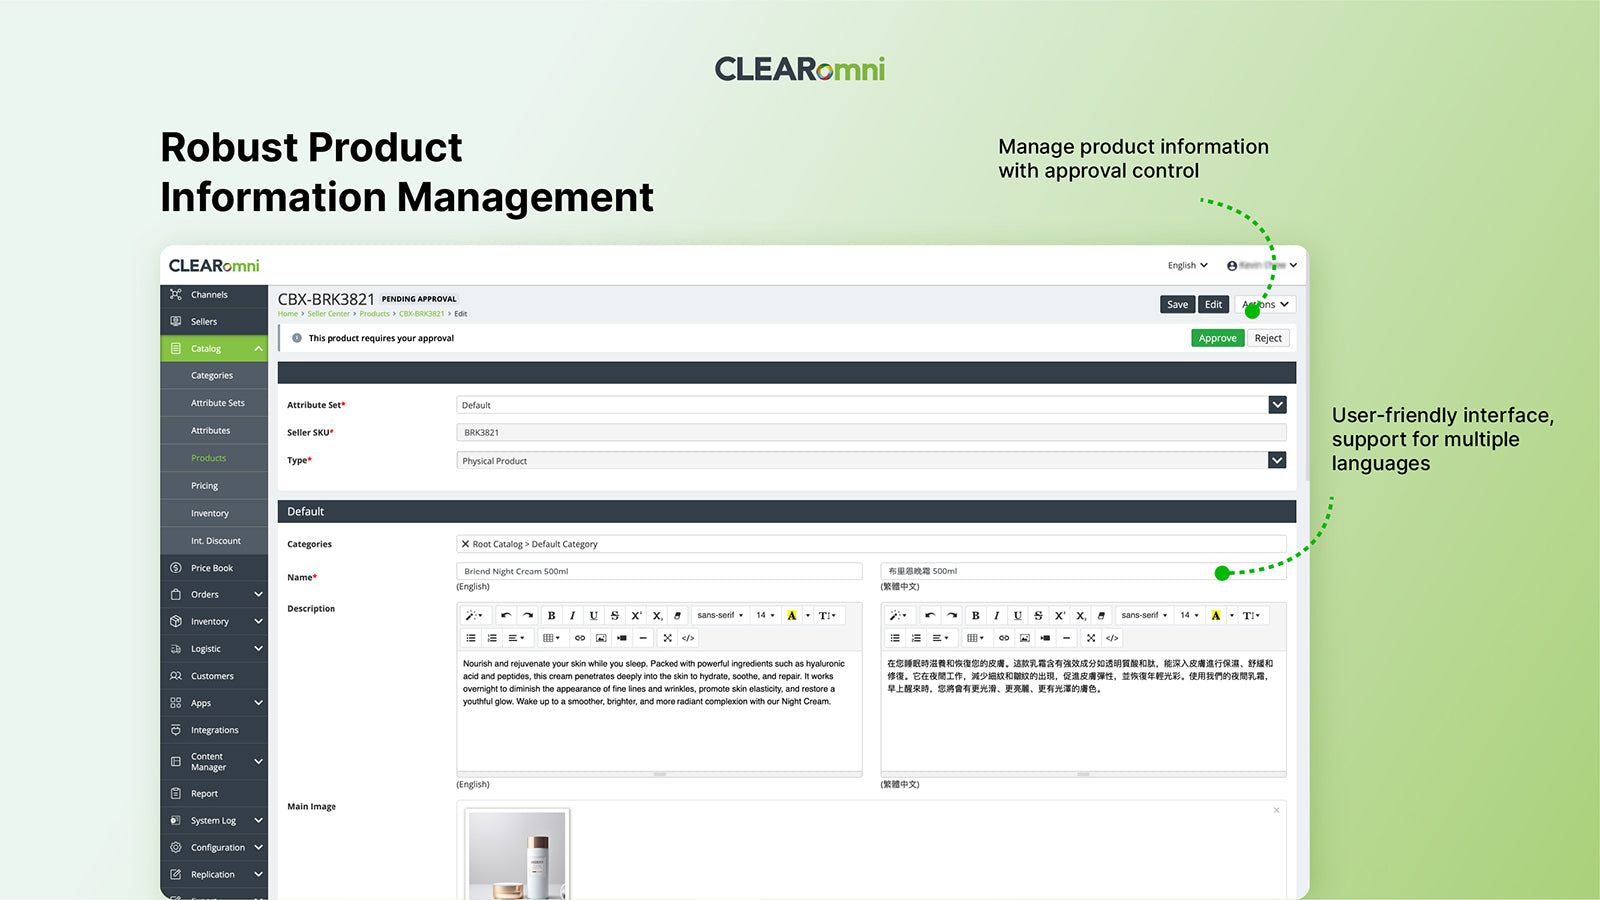 Robust Product Information Management